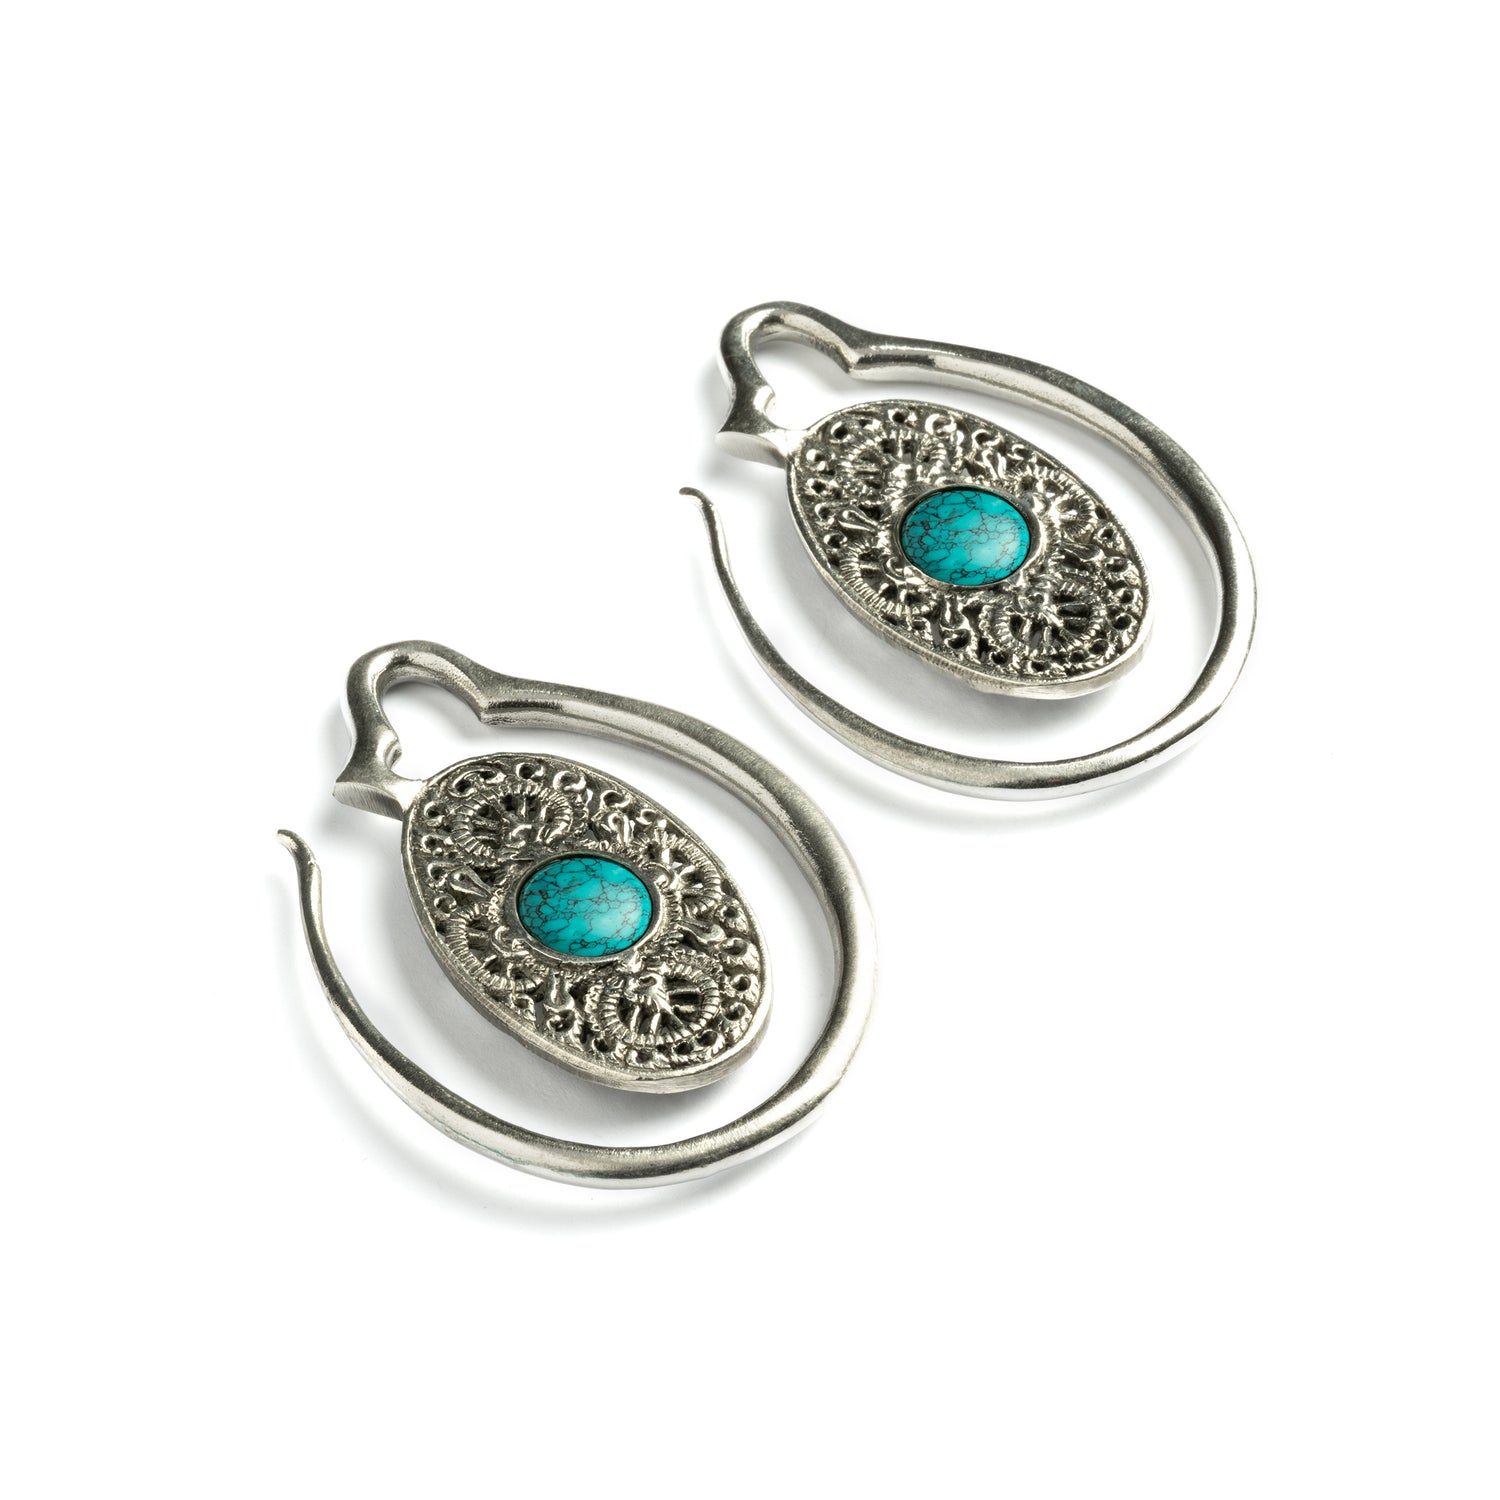 large ear weights hangers, silver colour oval shaped with intricate filigree pattern and turquoise